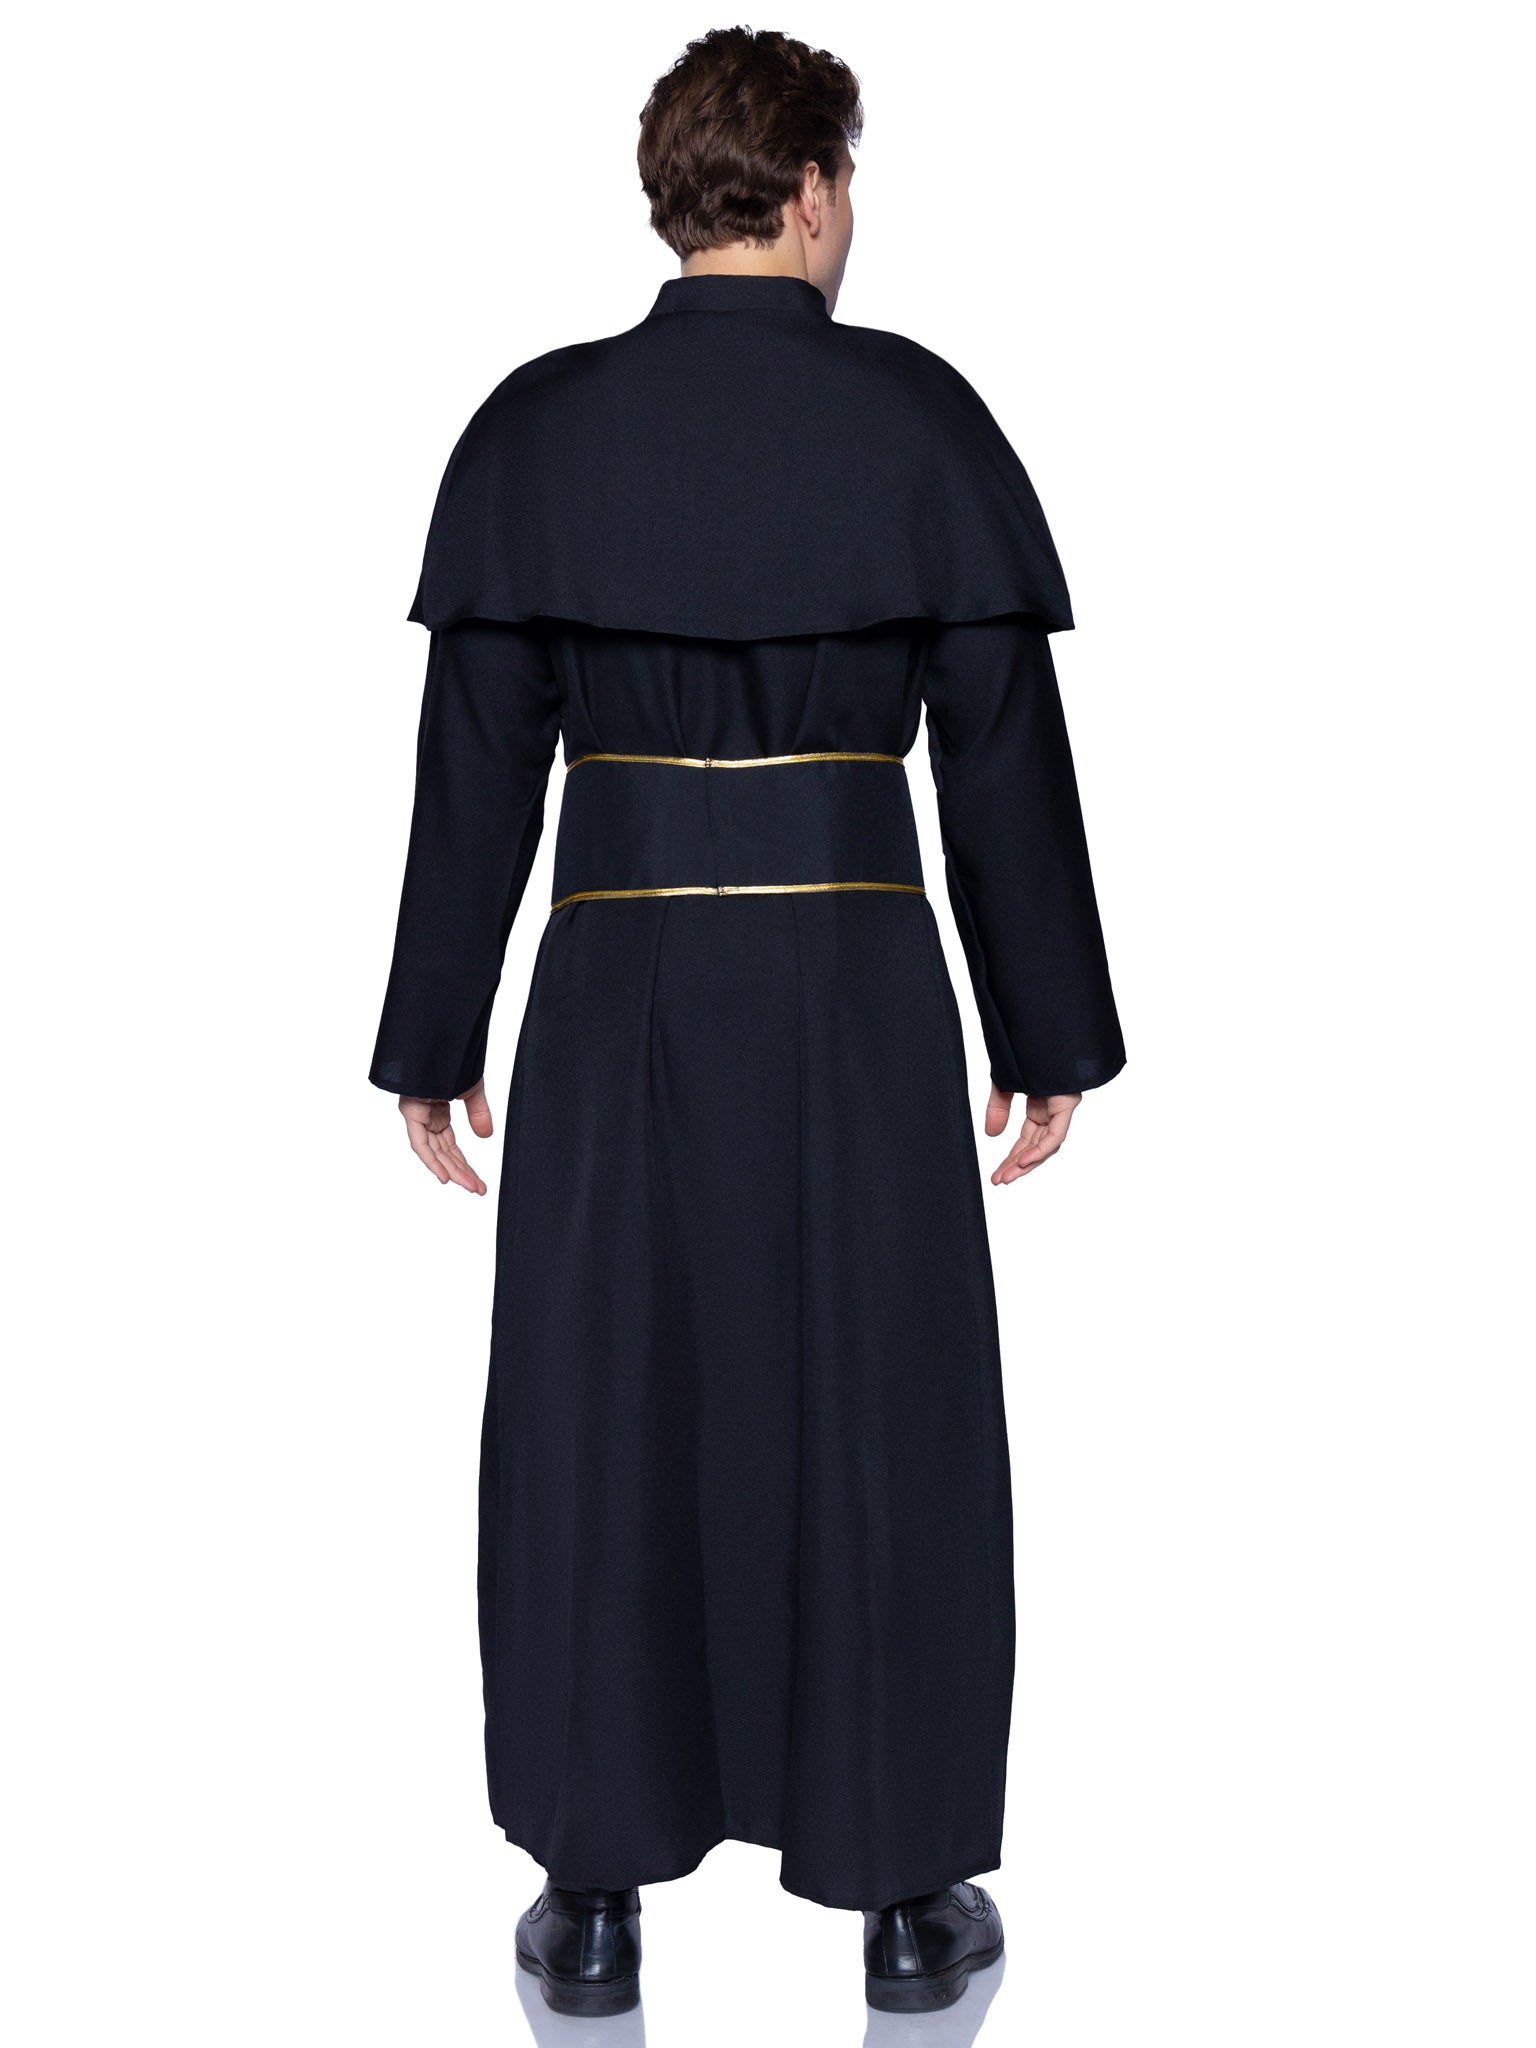  Priest Costume Set - Standard Size (Includes Robe